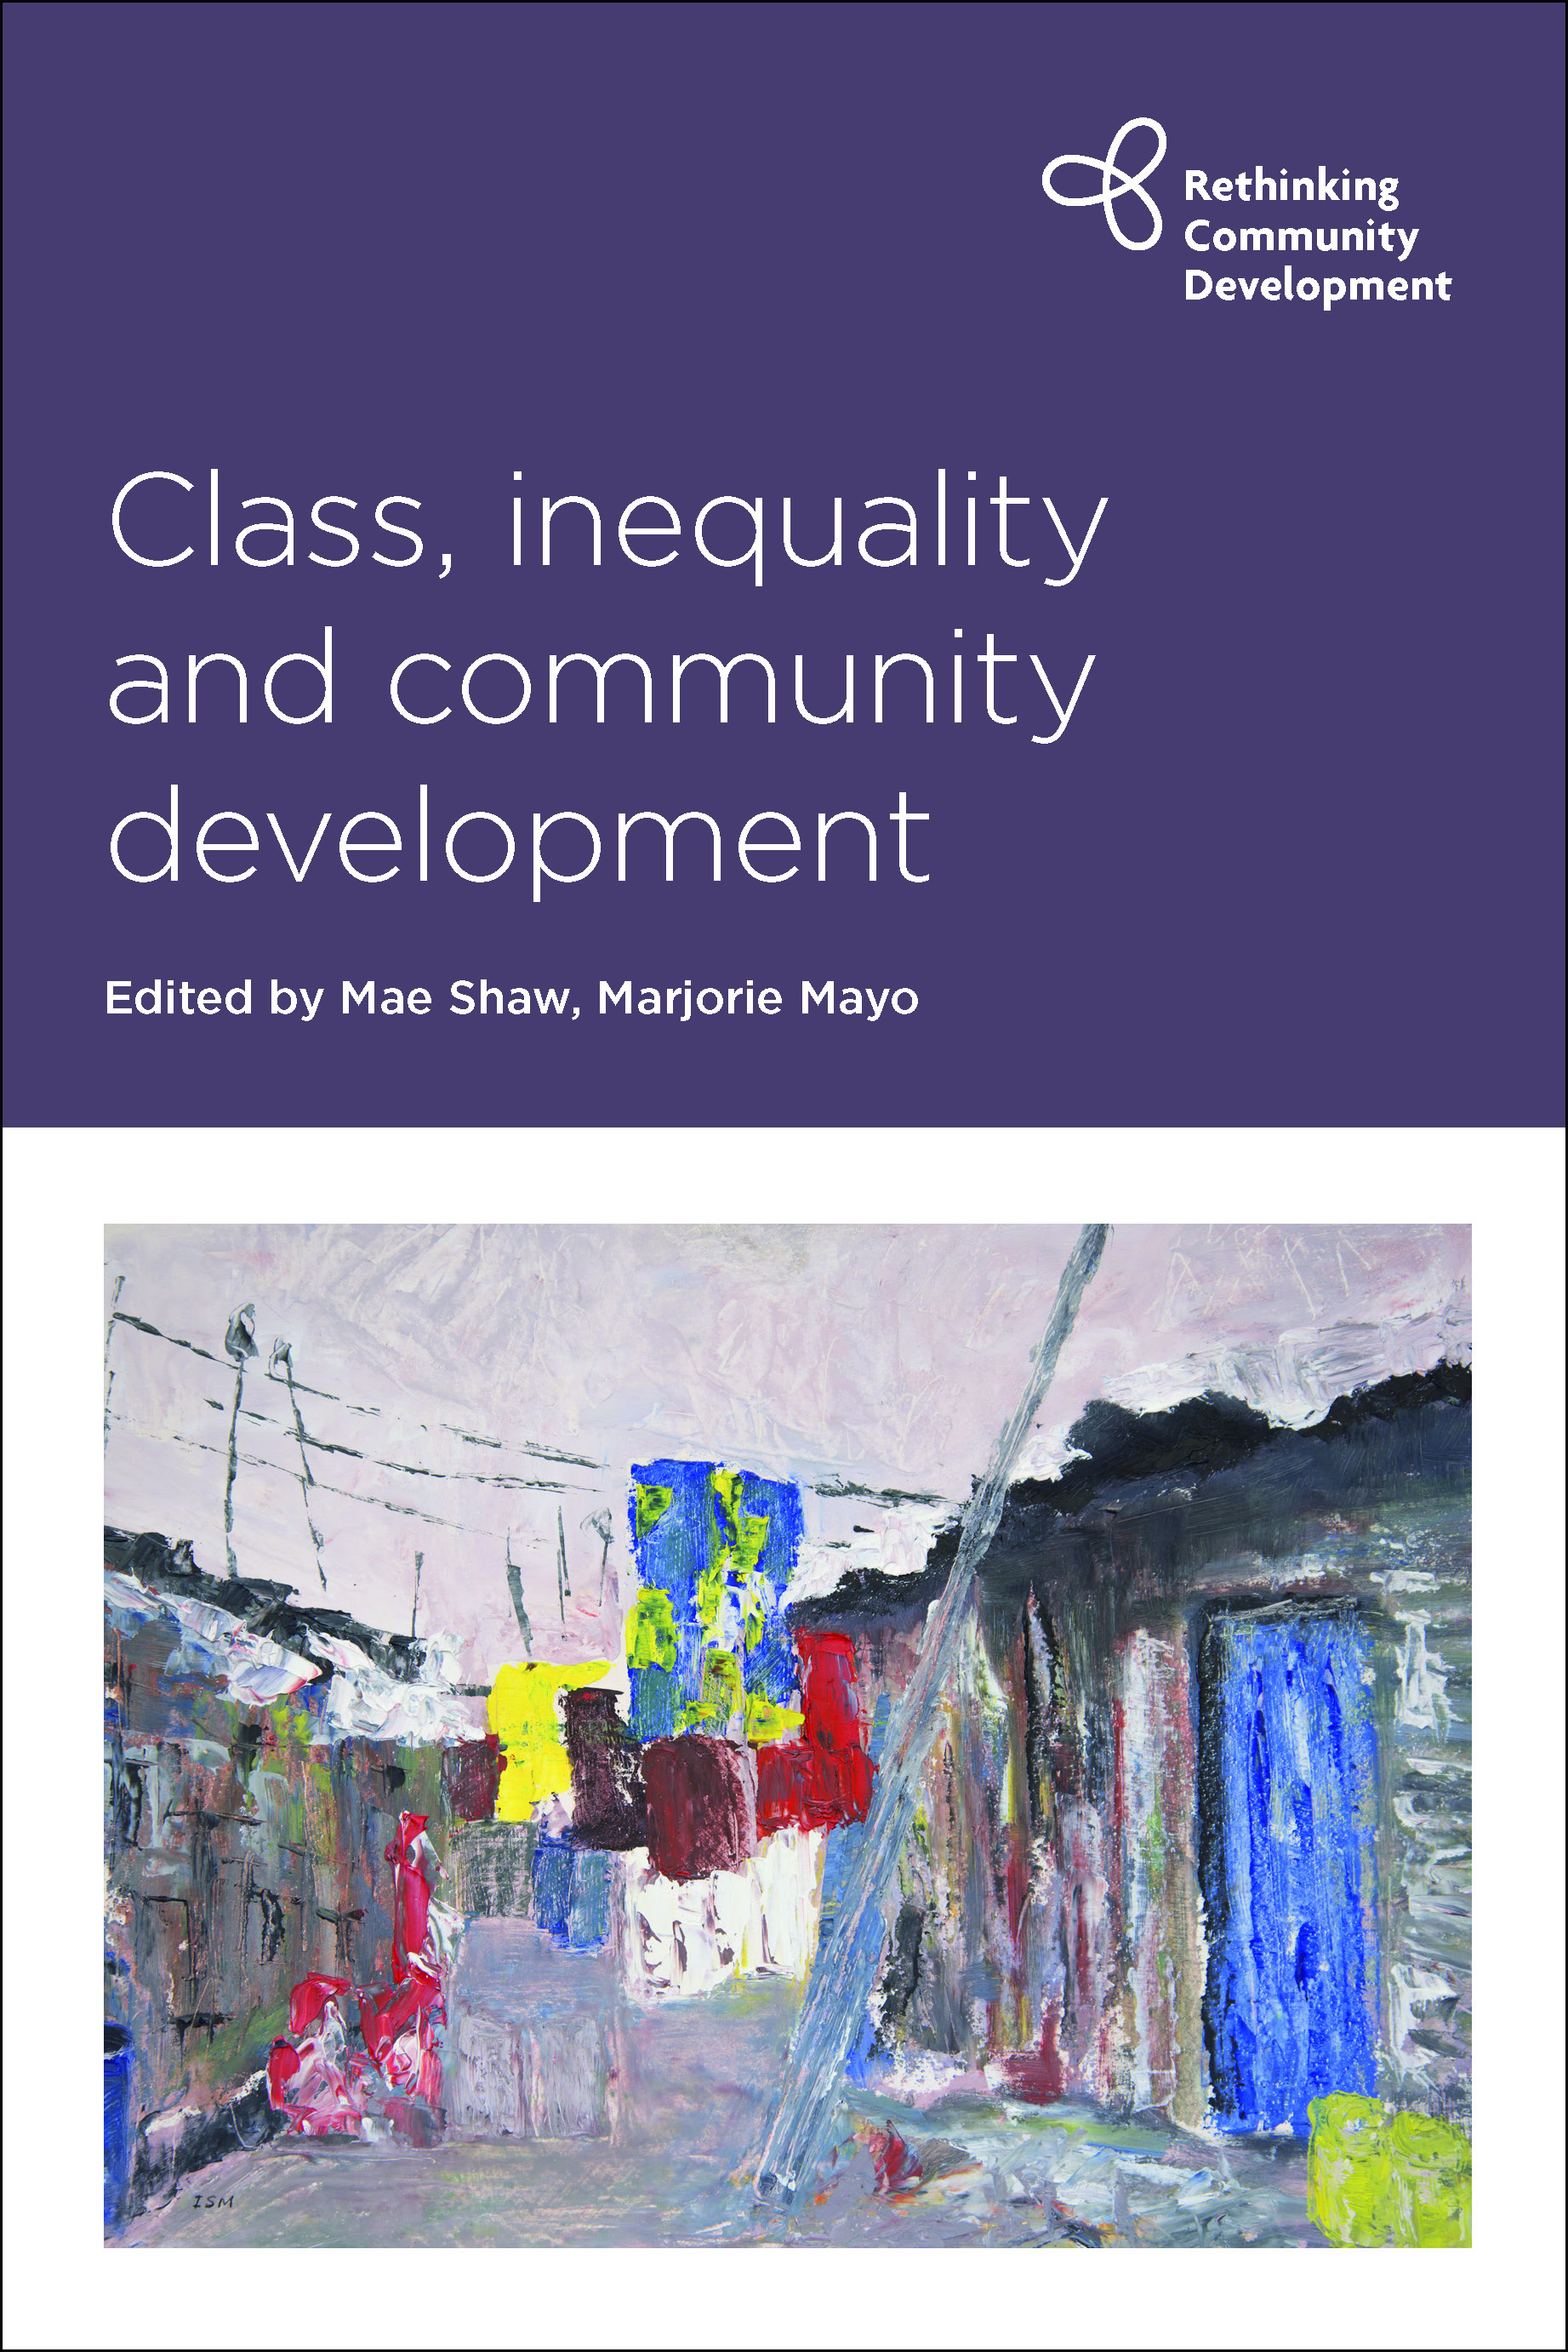 Series launch: Class and inequality: Rethinking community development in the age of austerity